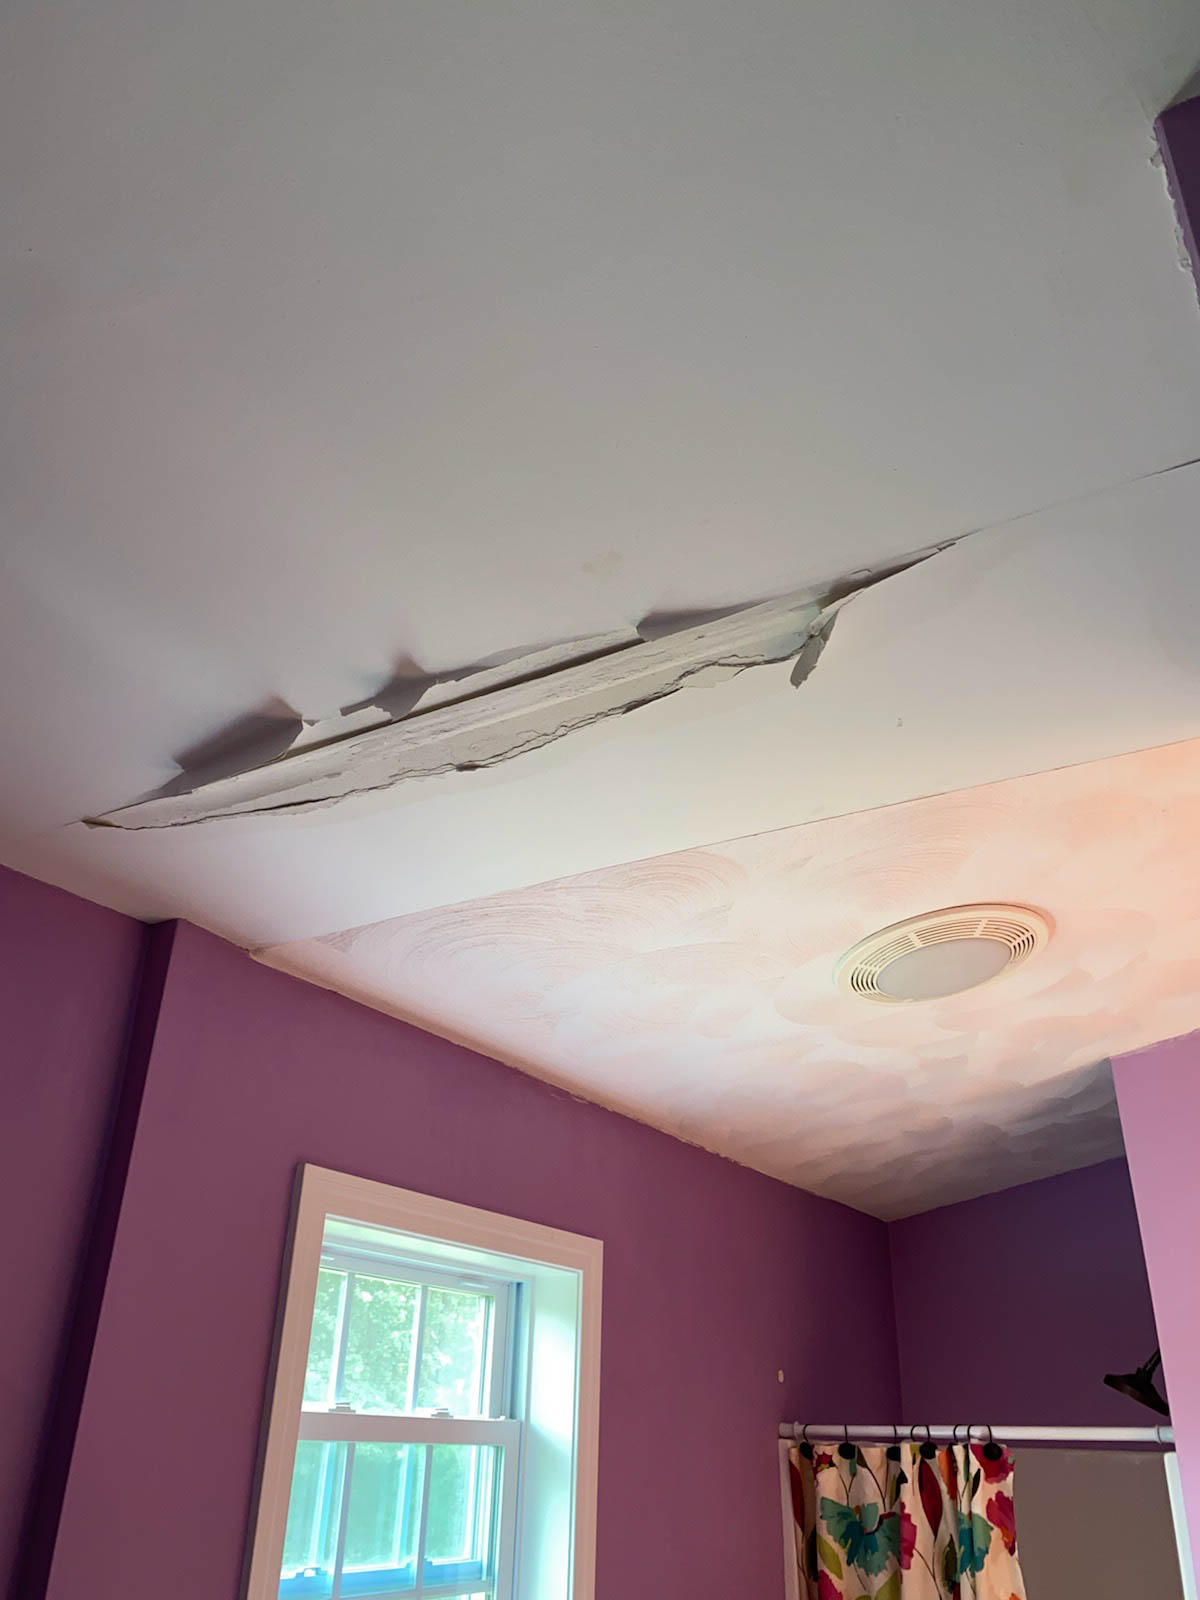 When it comes to water damage, you can trust the pros at SERVPRO of Providence to take care of your property in Elmwood, RI. We are ready to serve you!